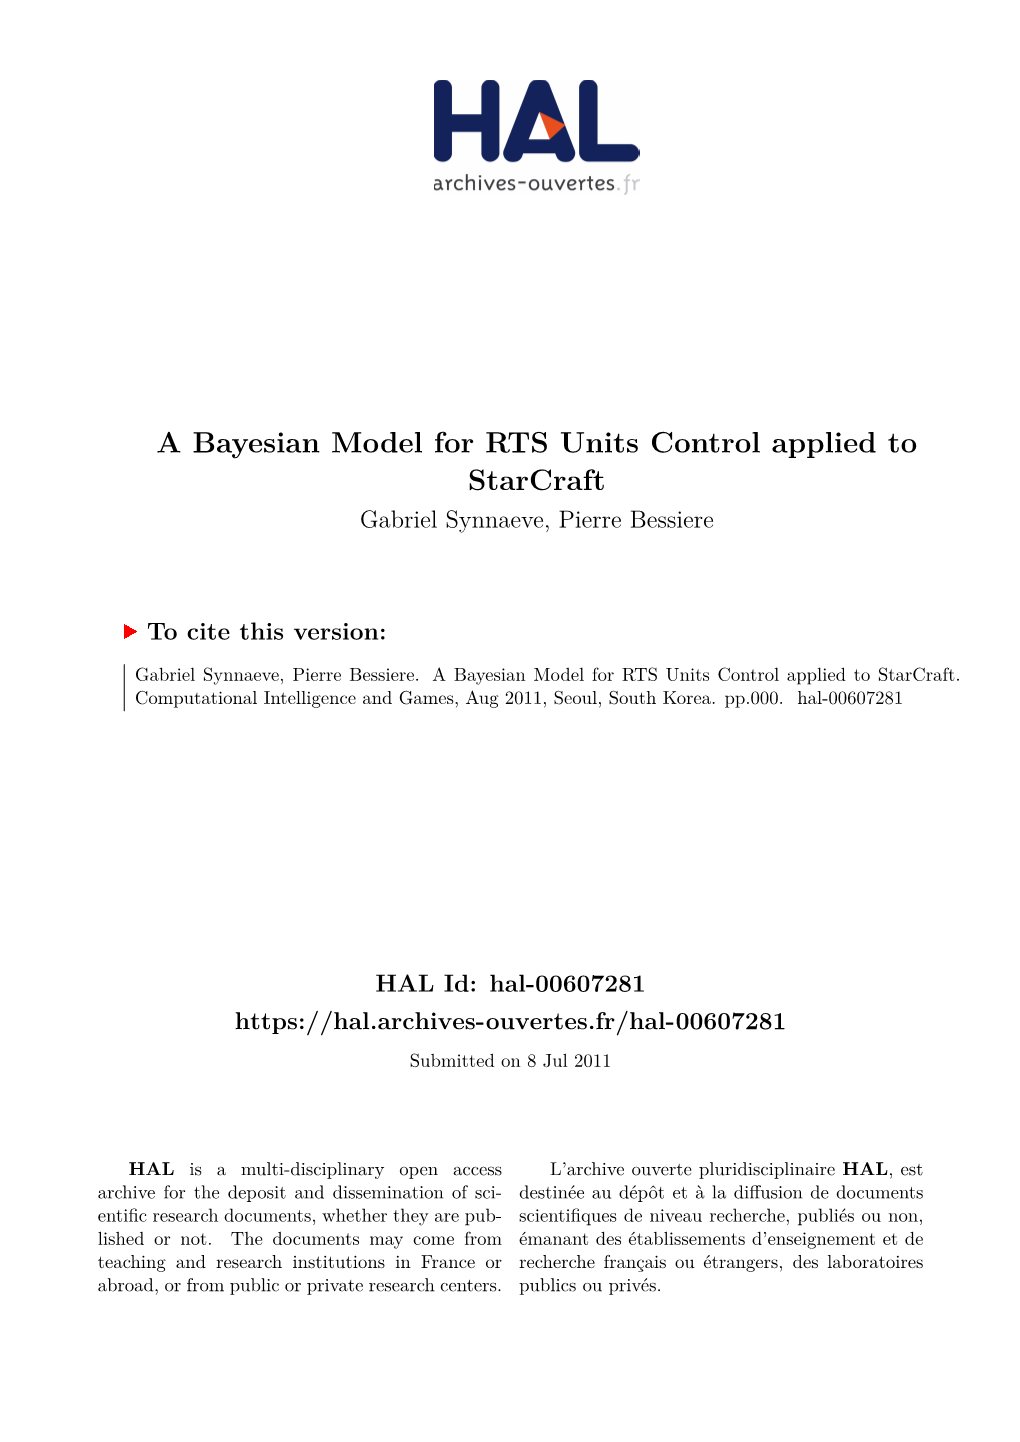 A Bayesian Model for RTS Units Control Applied to Starcraft Gabriel Synnaeve, Pierre Bessiere